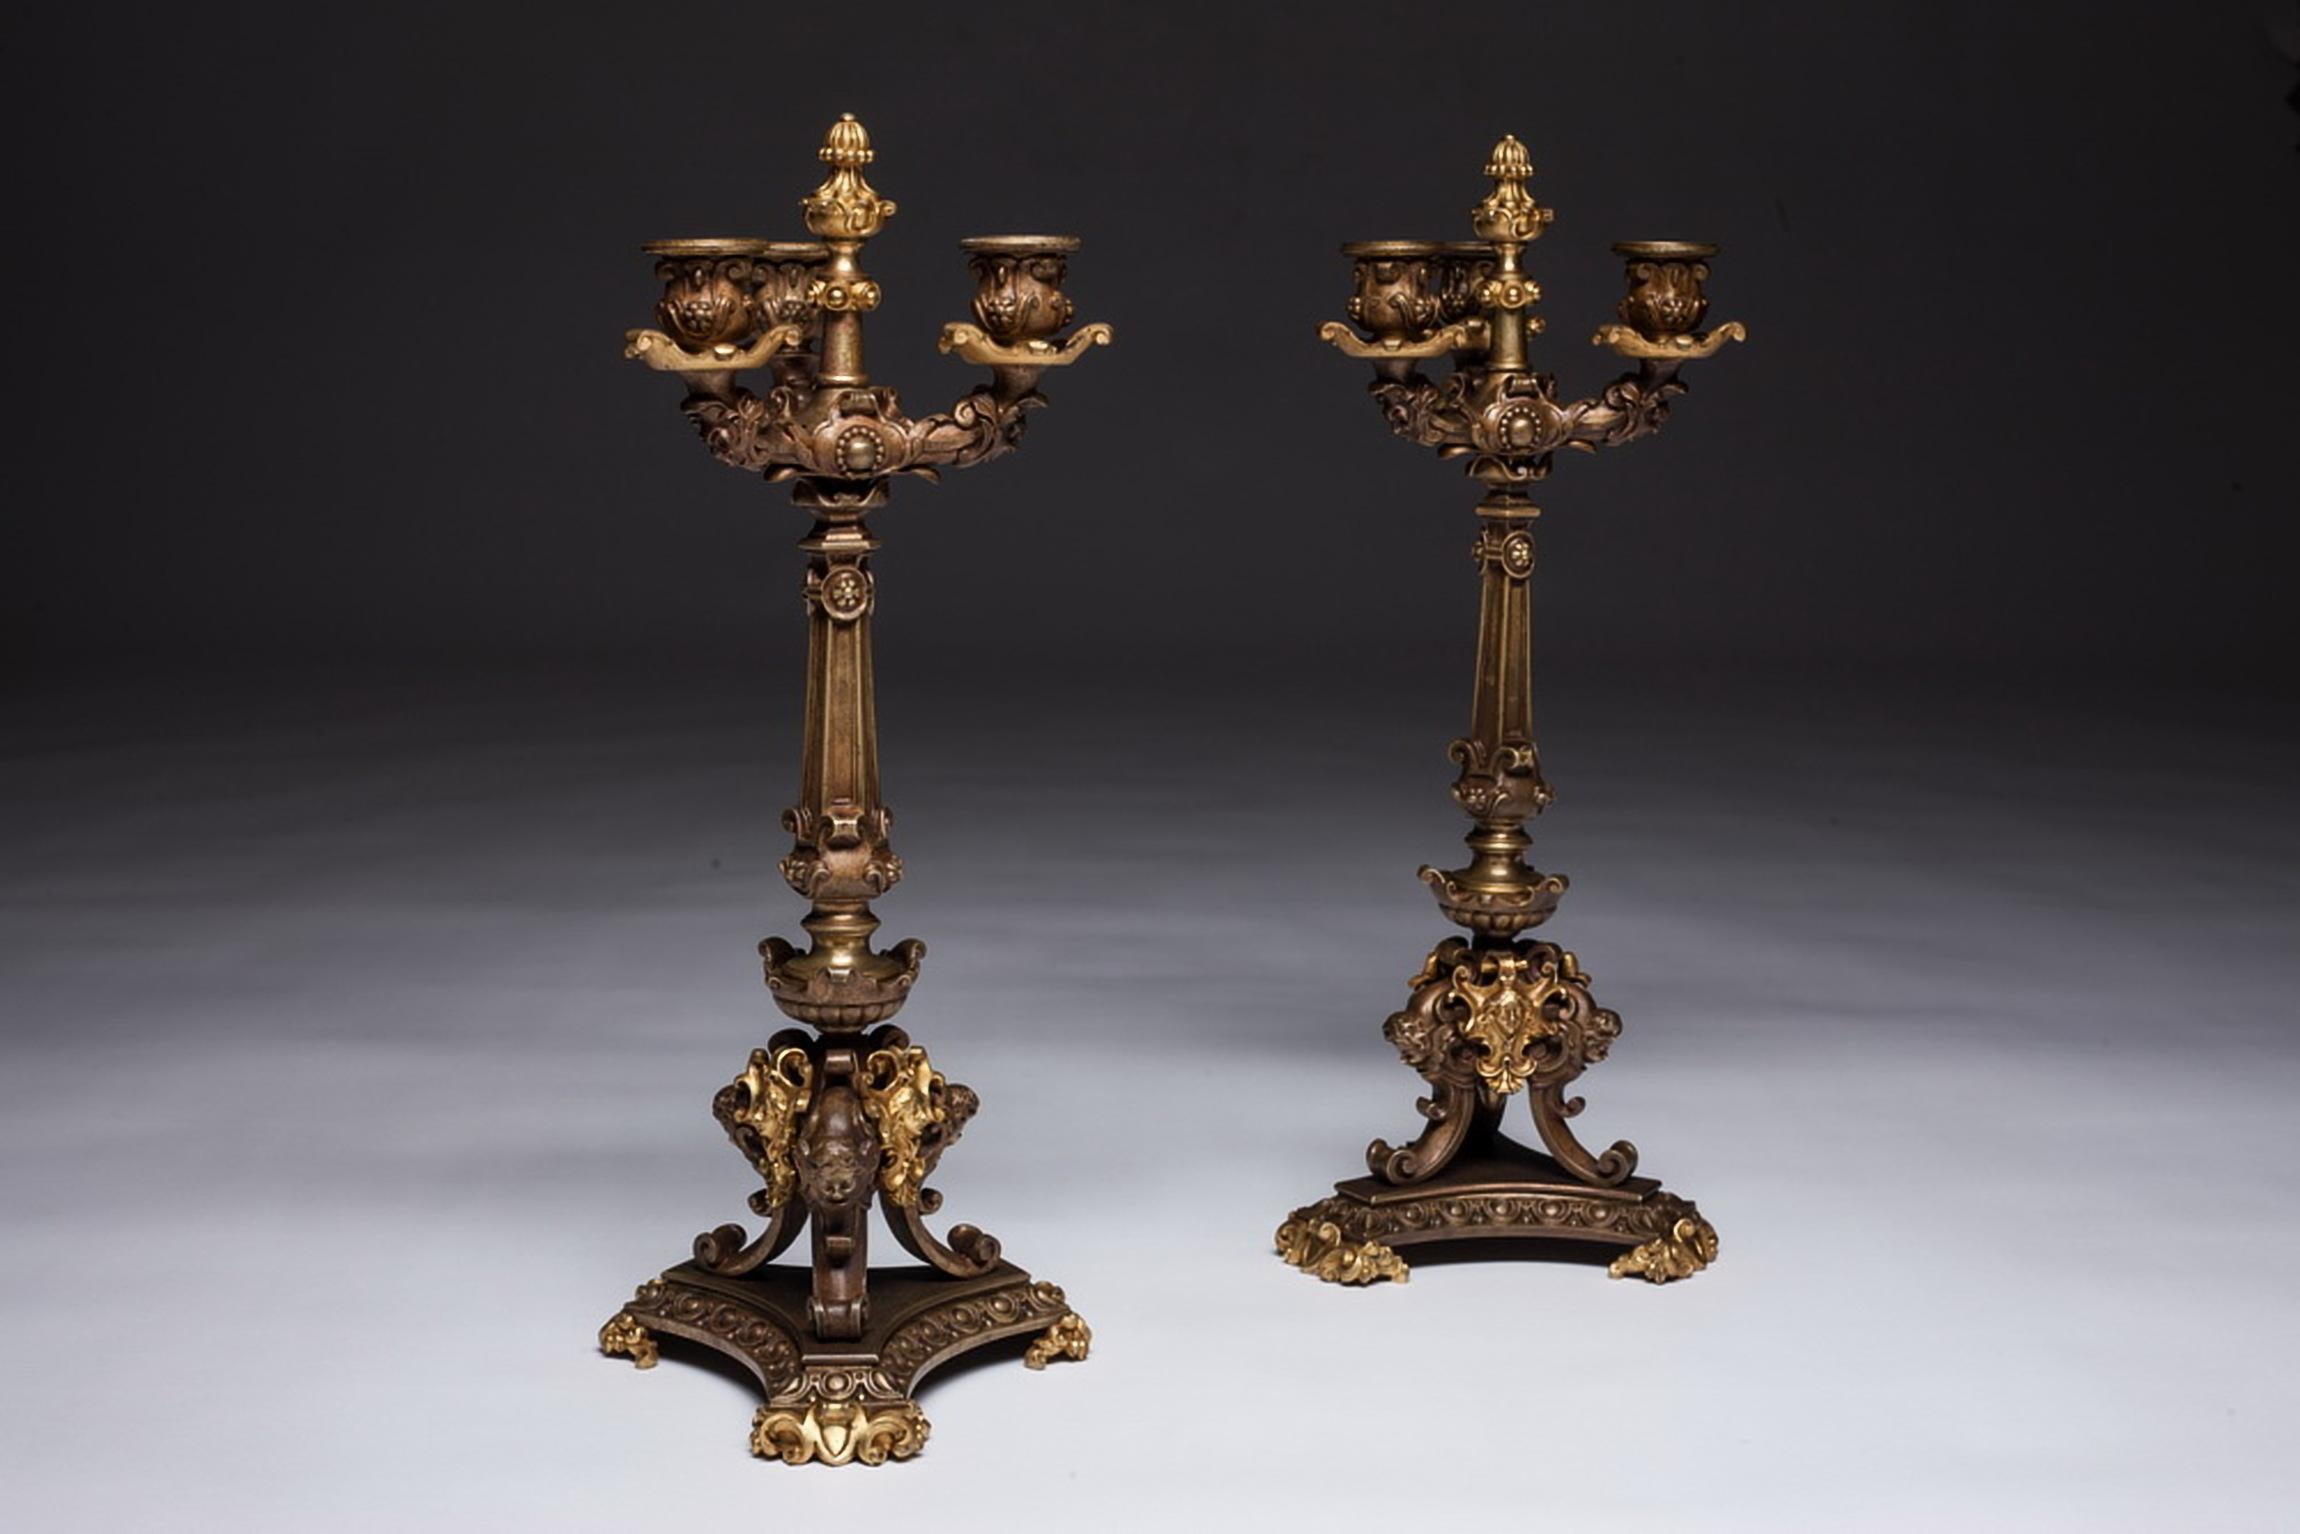 Magnificent pair gilt doré bronze three-light Empire style candelabras. Very well crafted and intricately detailed. Bottom is made with mythological figure faces. Columnar candelabra on triangular bases.

 